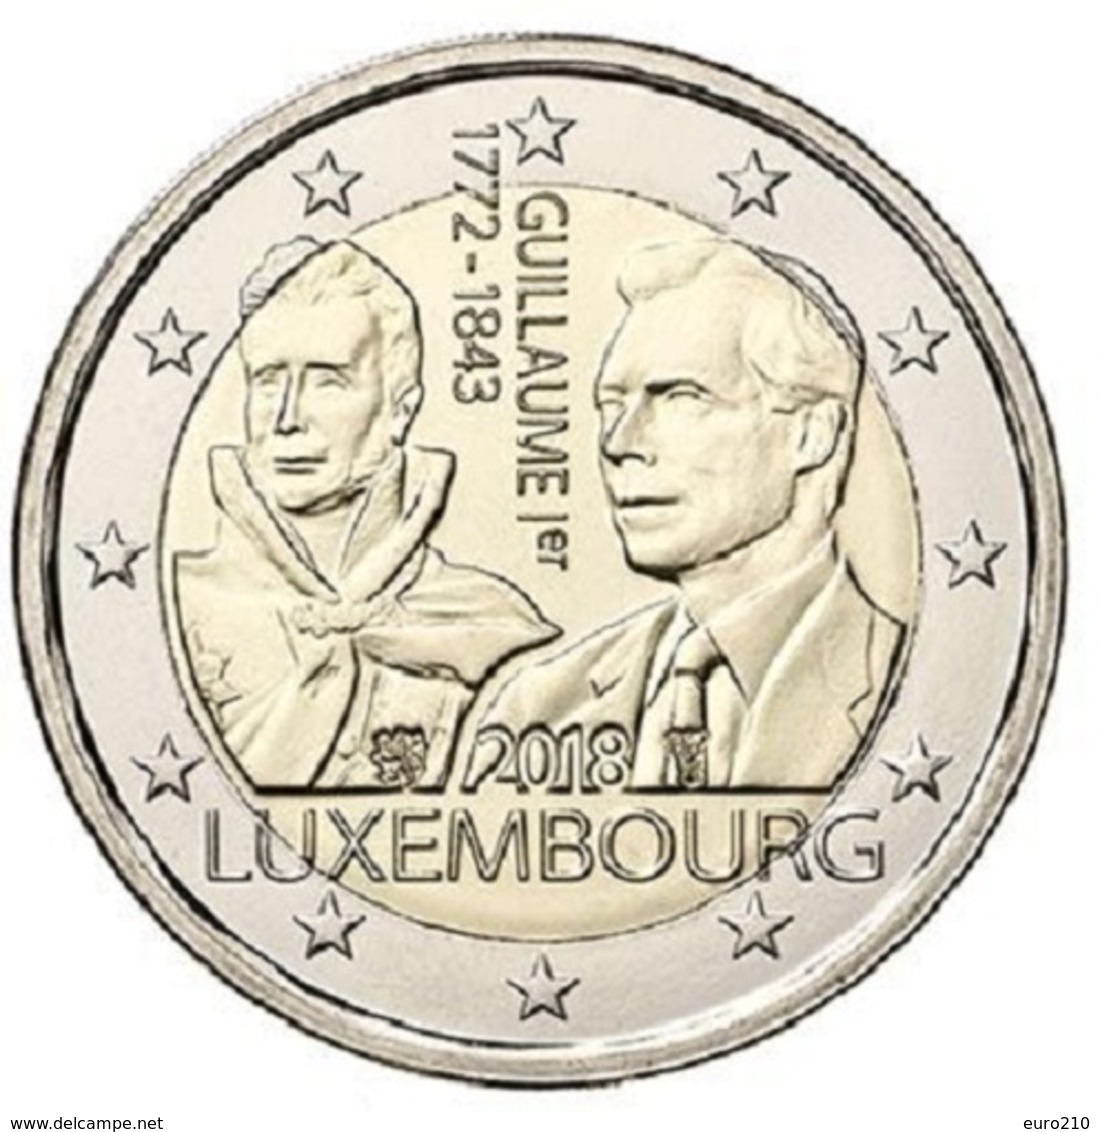 LUXEMBOURG 2 EURO 2018 - Guillaume I - UNC - Luxembourg